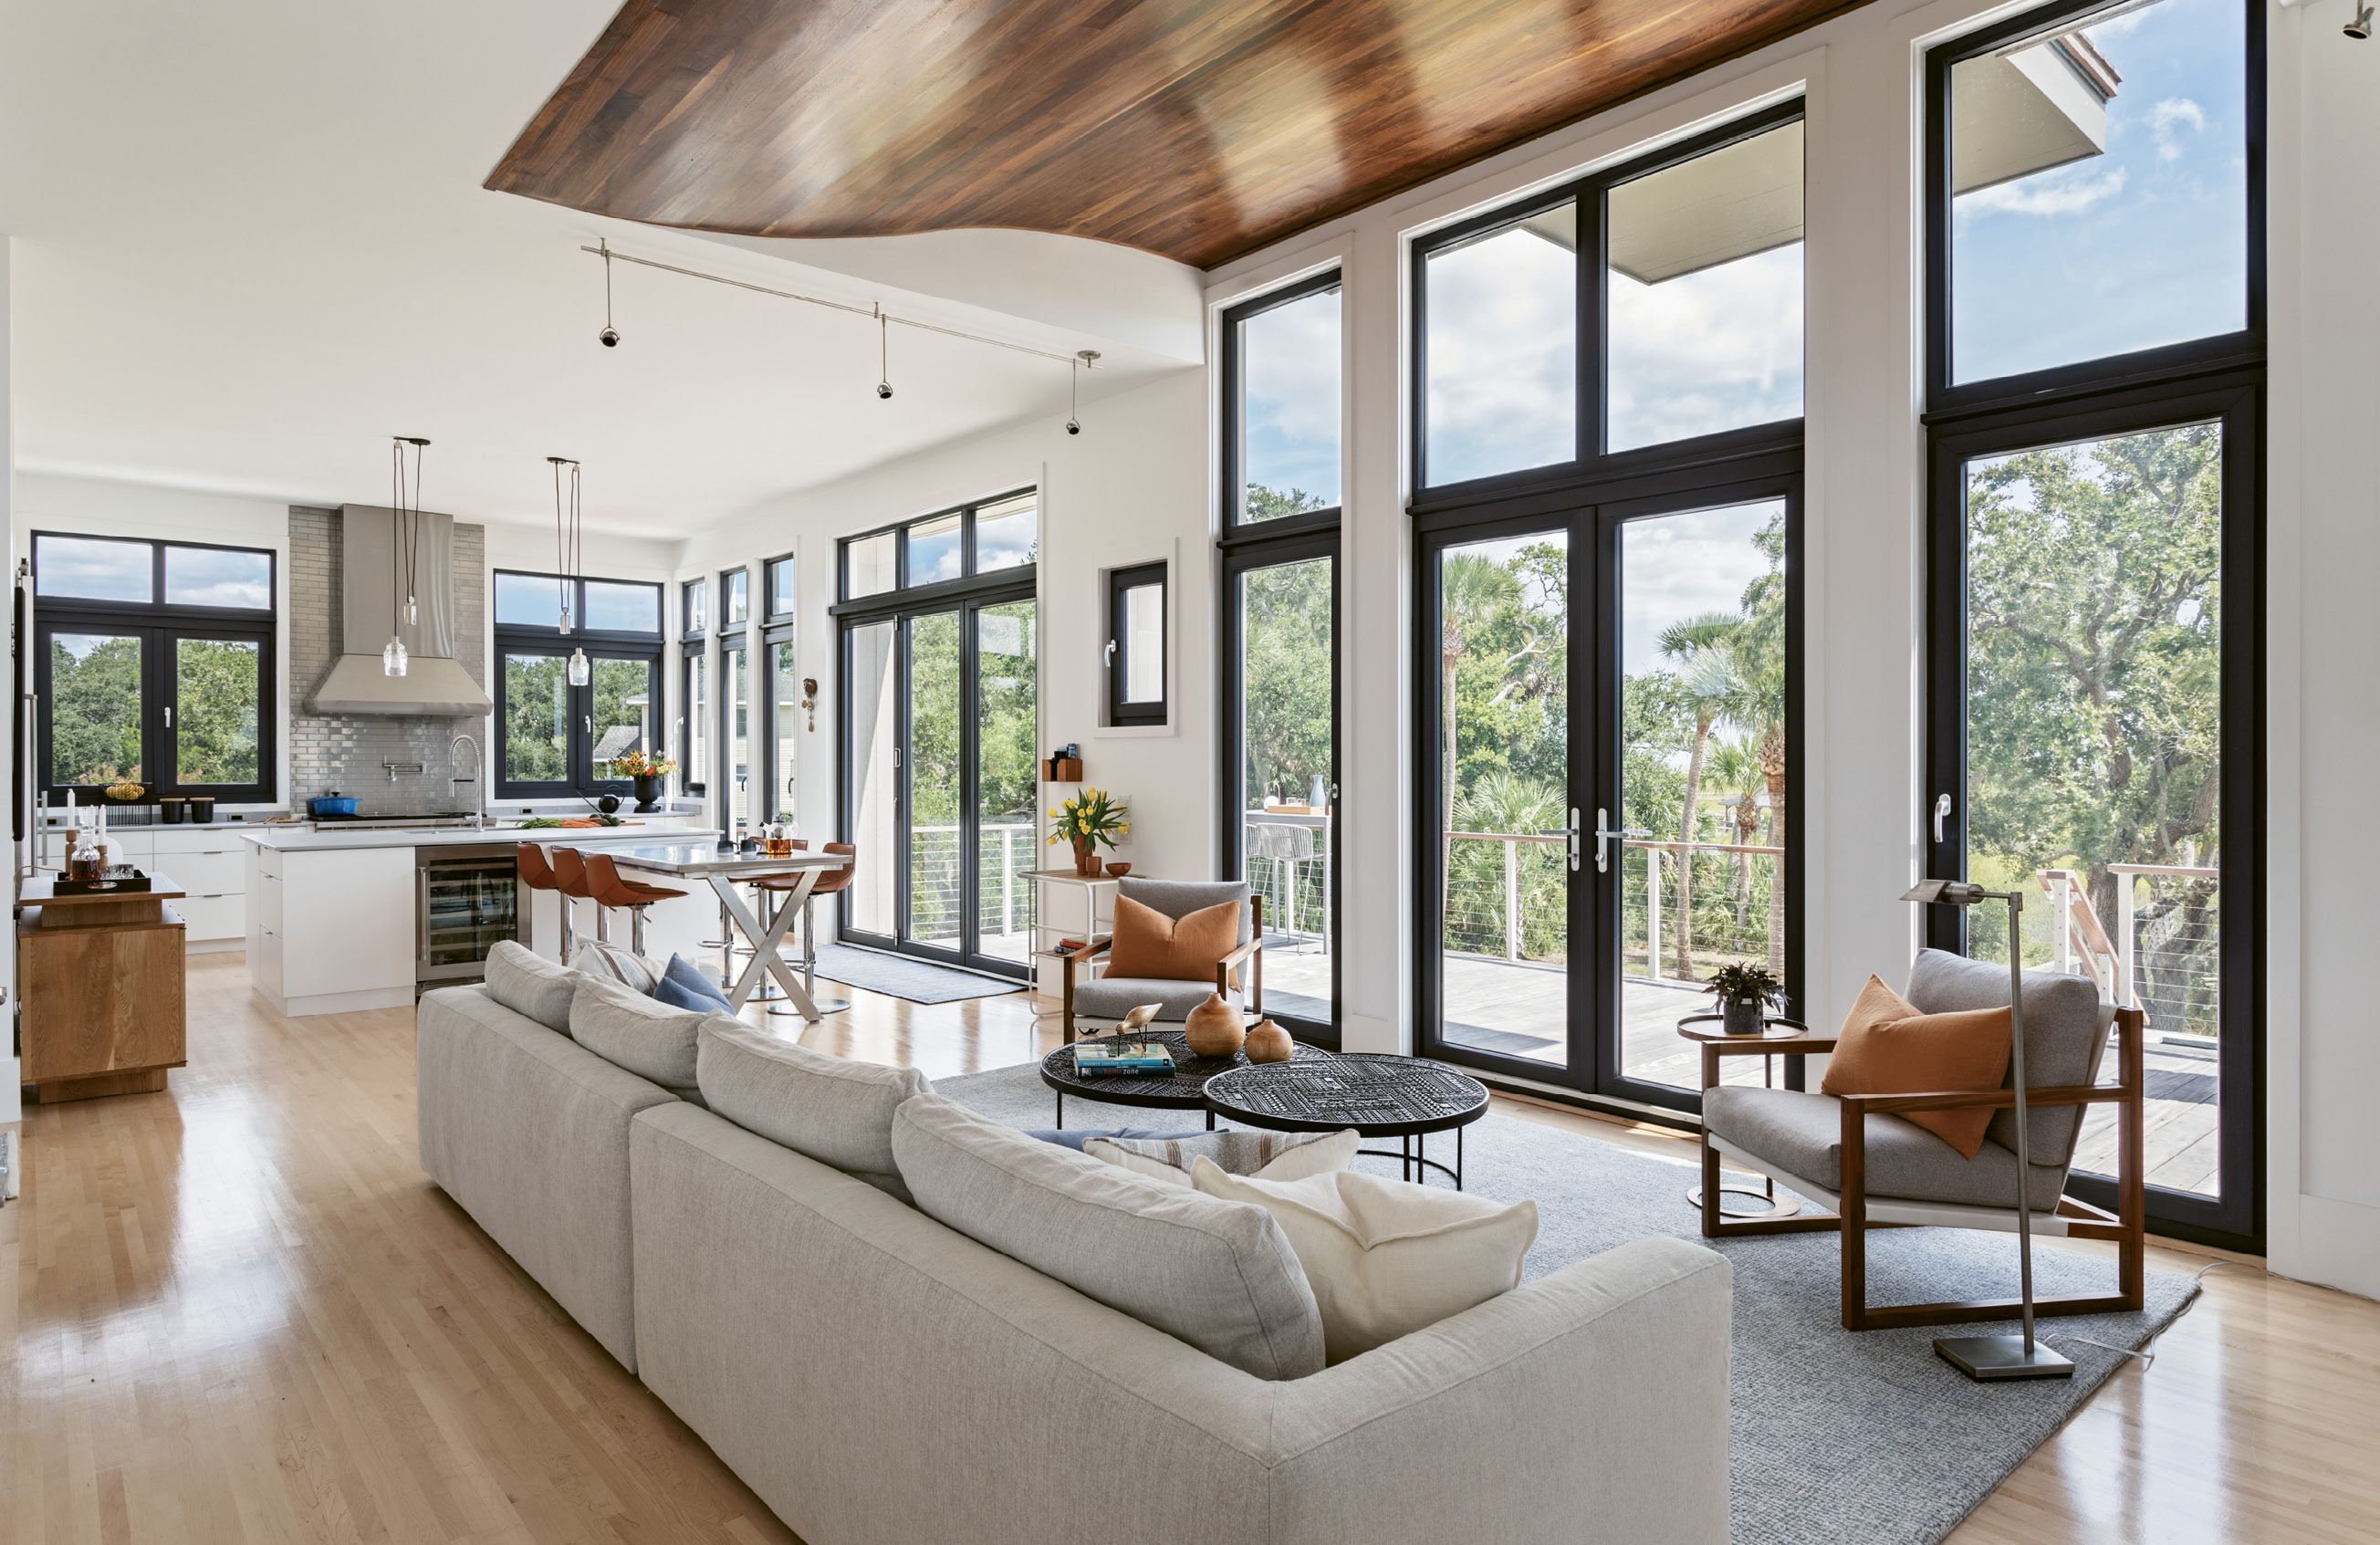 LINES OF SIGHT: Custom Henselstone German windows and glass doors open out from the main living space onto a spacious deck. In the elongated lounge area, low-slung contemporary European furniture with unobtrusive styling helps keep the focus on the outdoors.